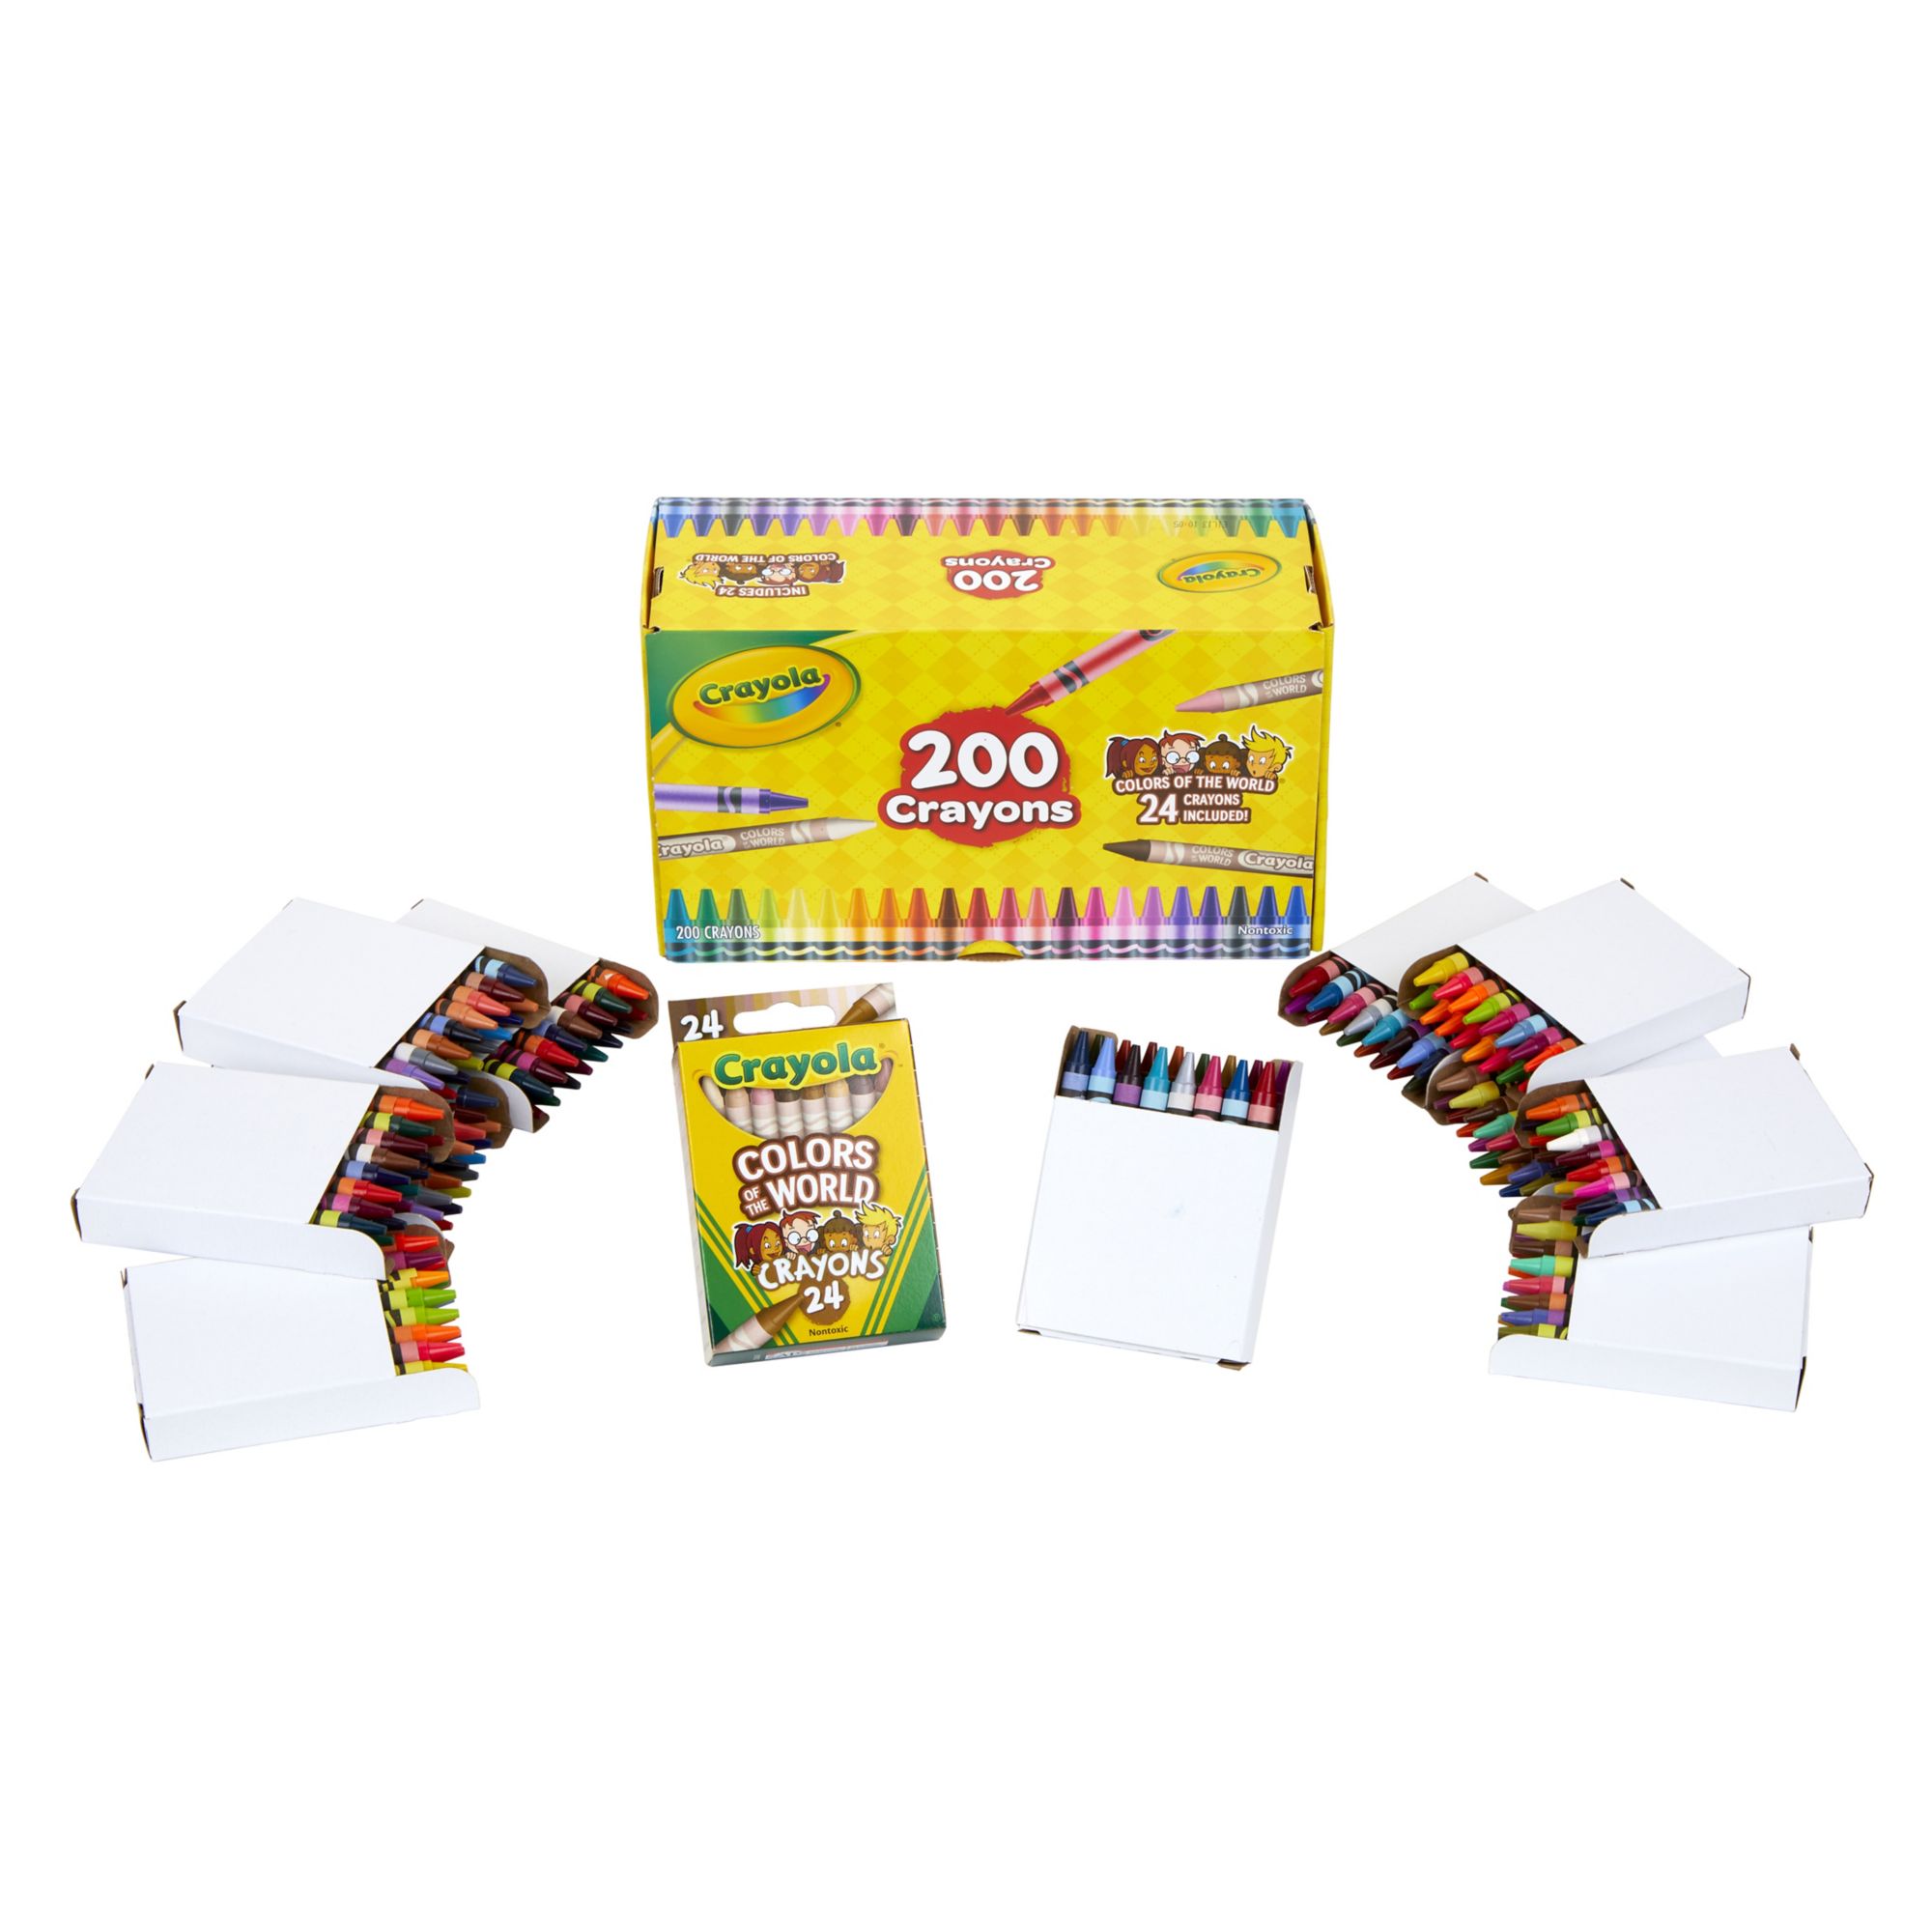 Crayola Crayon Box Featuring Colors of the World, 200 ct.